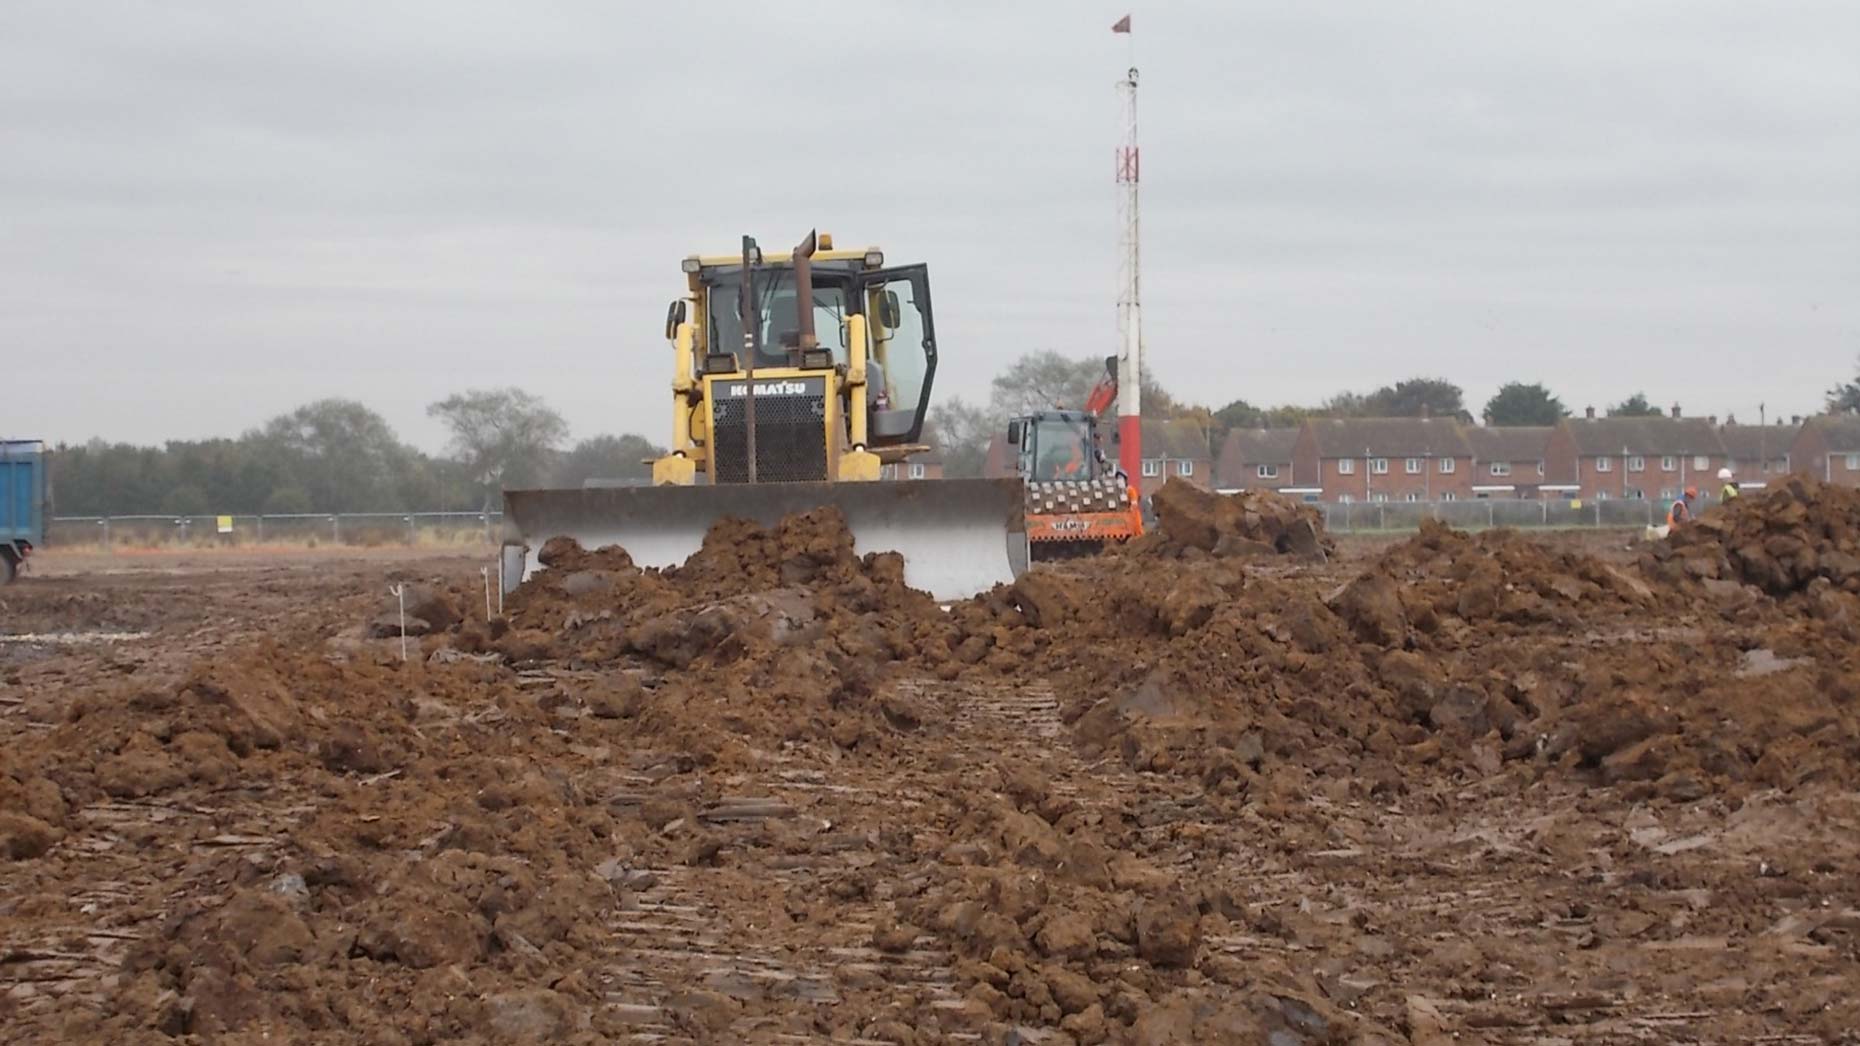 The construction project is scheduled to last 4 years, with the housing estimated to take two years to complete and Tesco beginning its building works in August 2014.